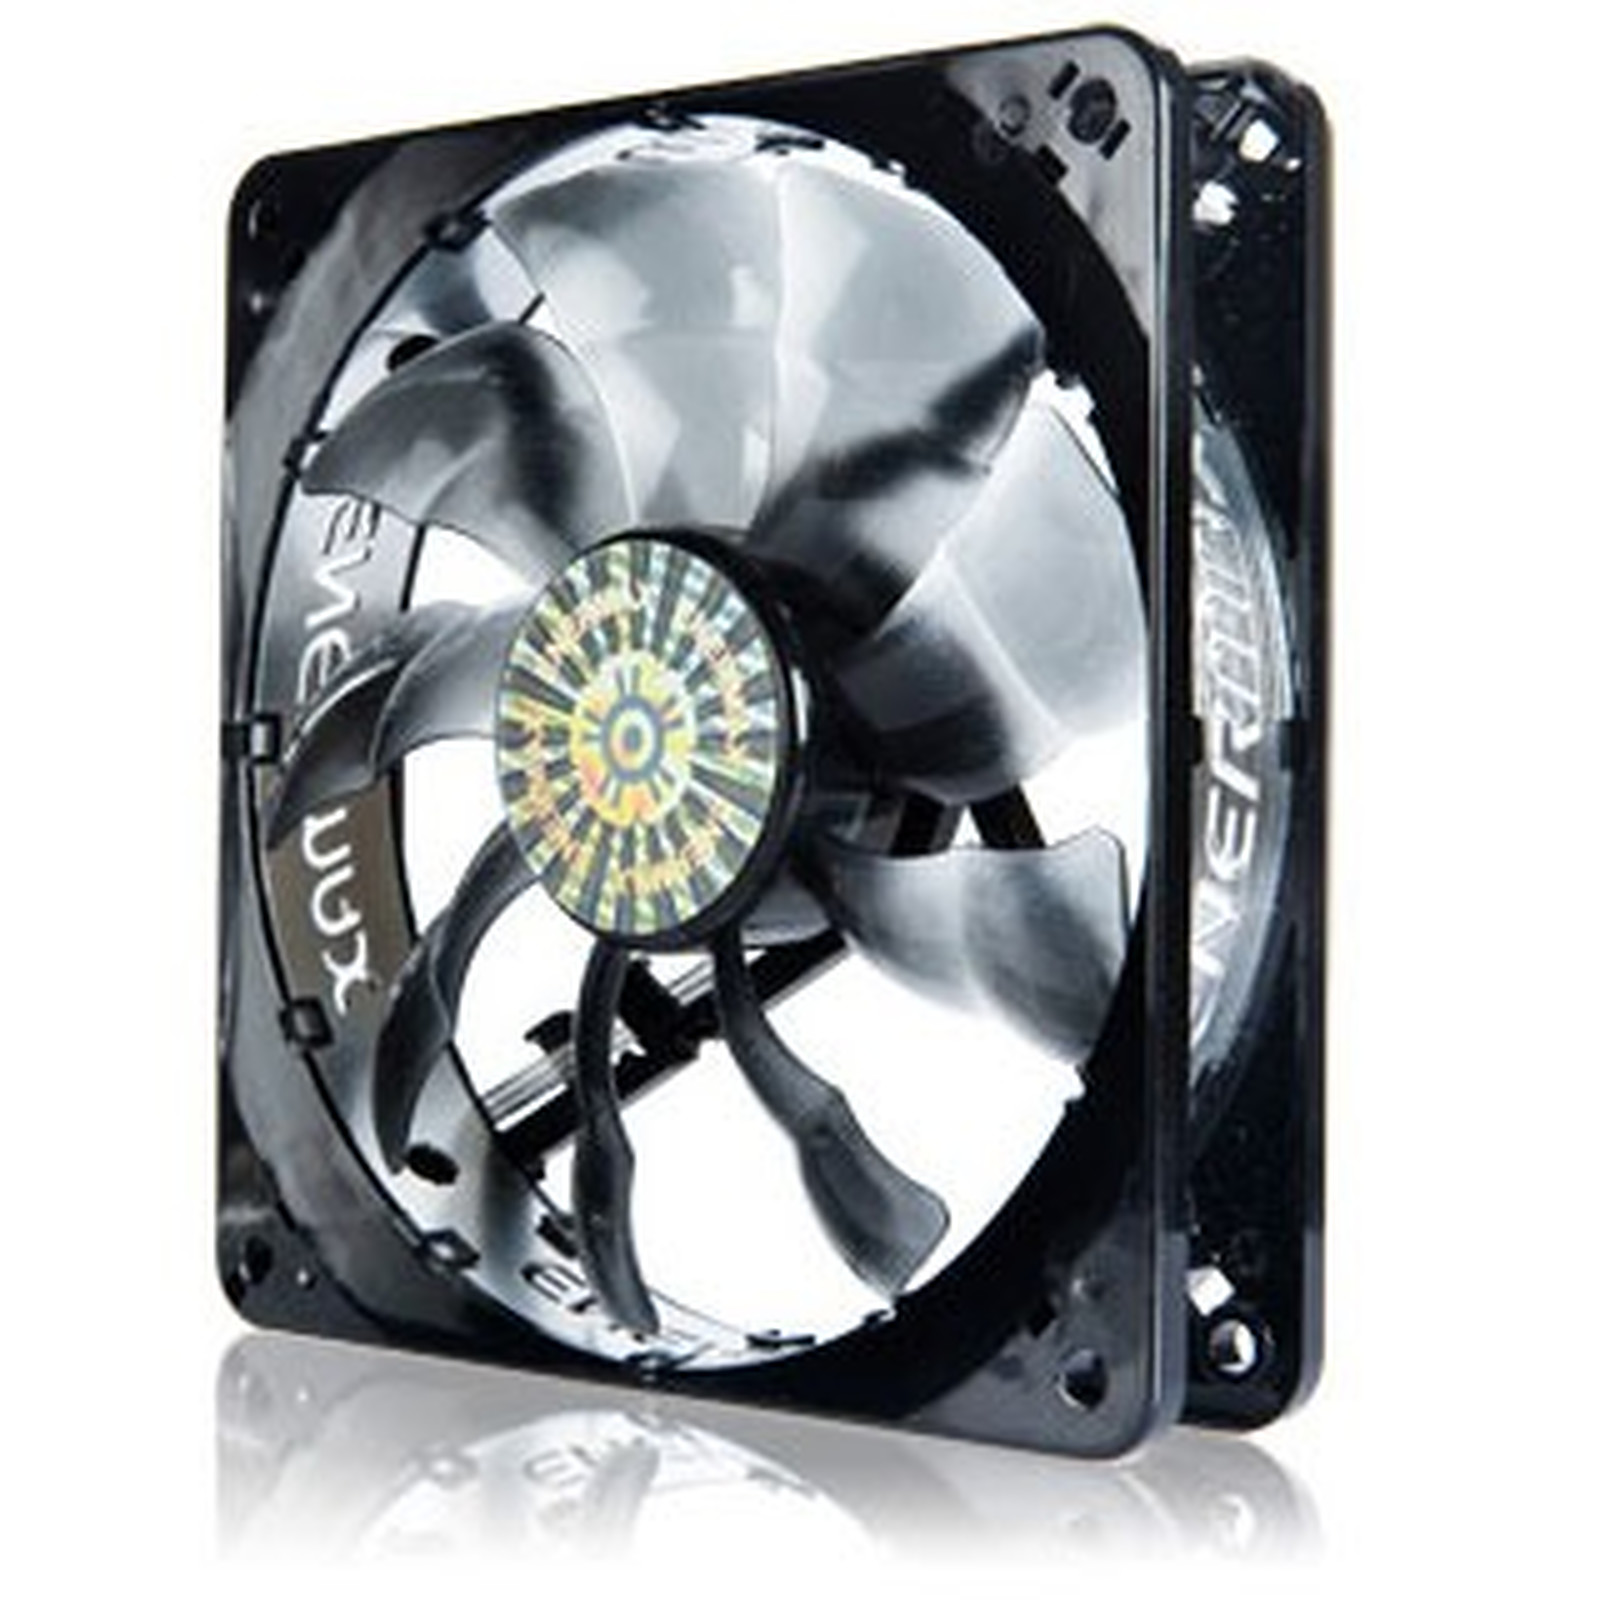 Enermax T.B.SILENCE UCTB12 · Occasion - Ventilateur boitier Enermax - Occasion